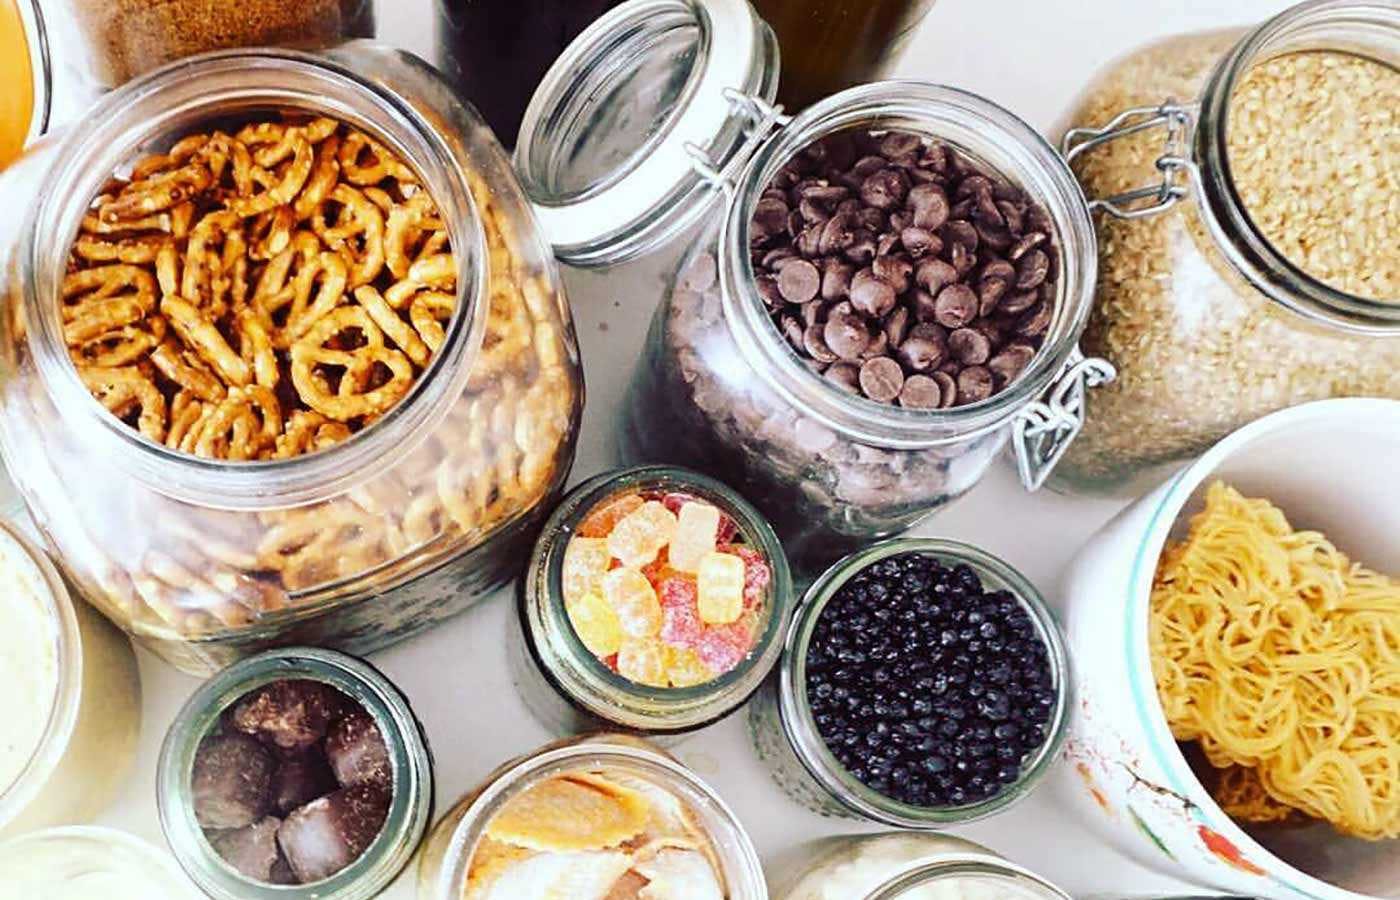 Snacks and candy in glass jars